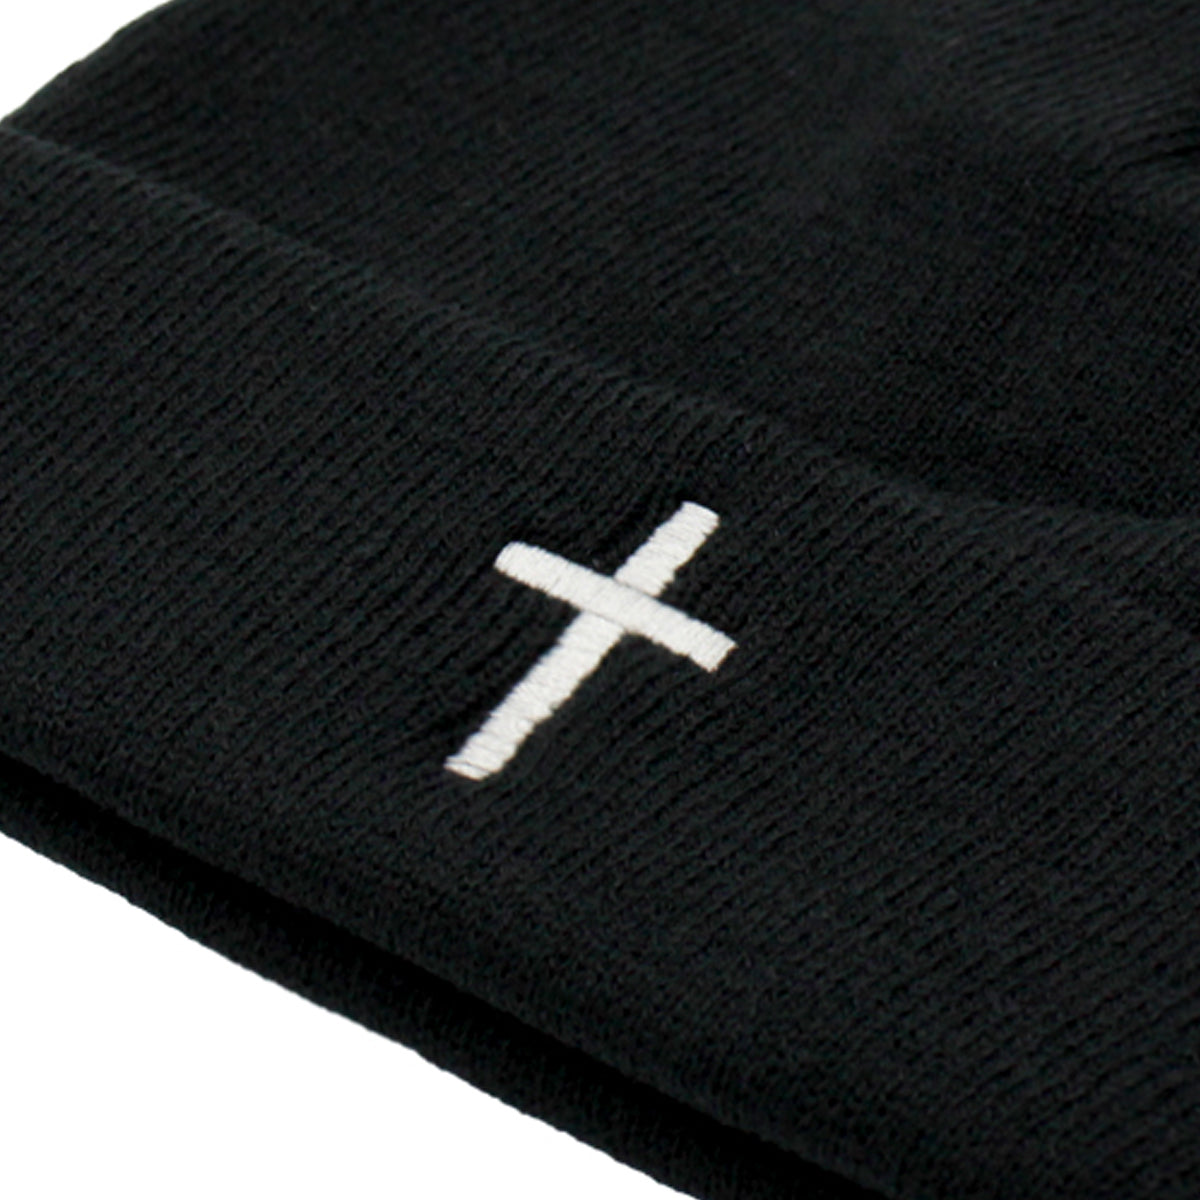 Unisex Knit Beanie Hat with Faith Cross Embroidery - Warm & Stylish, Perfect for Winter Outdoor Activities & Daily Use for Both Men and Women - ACCEHUT